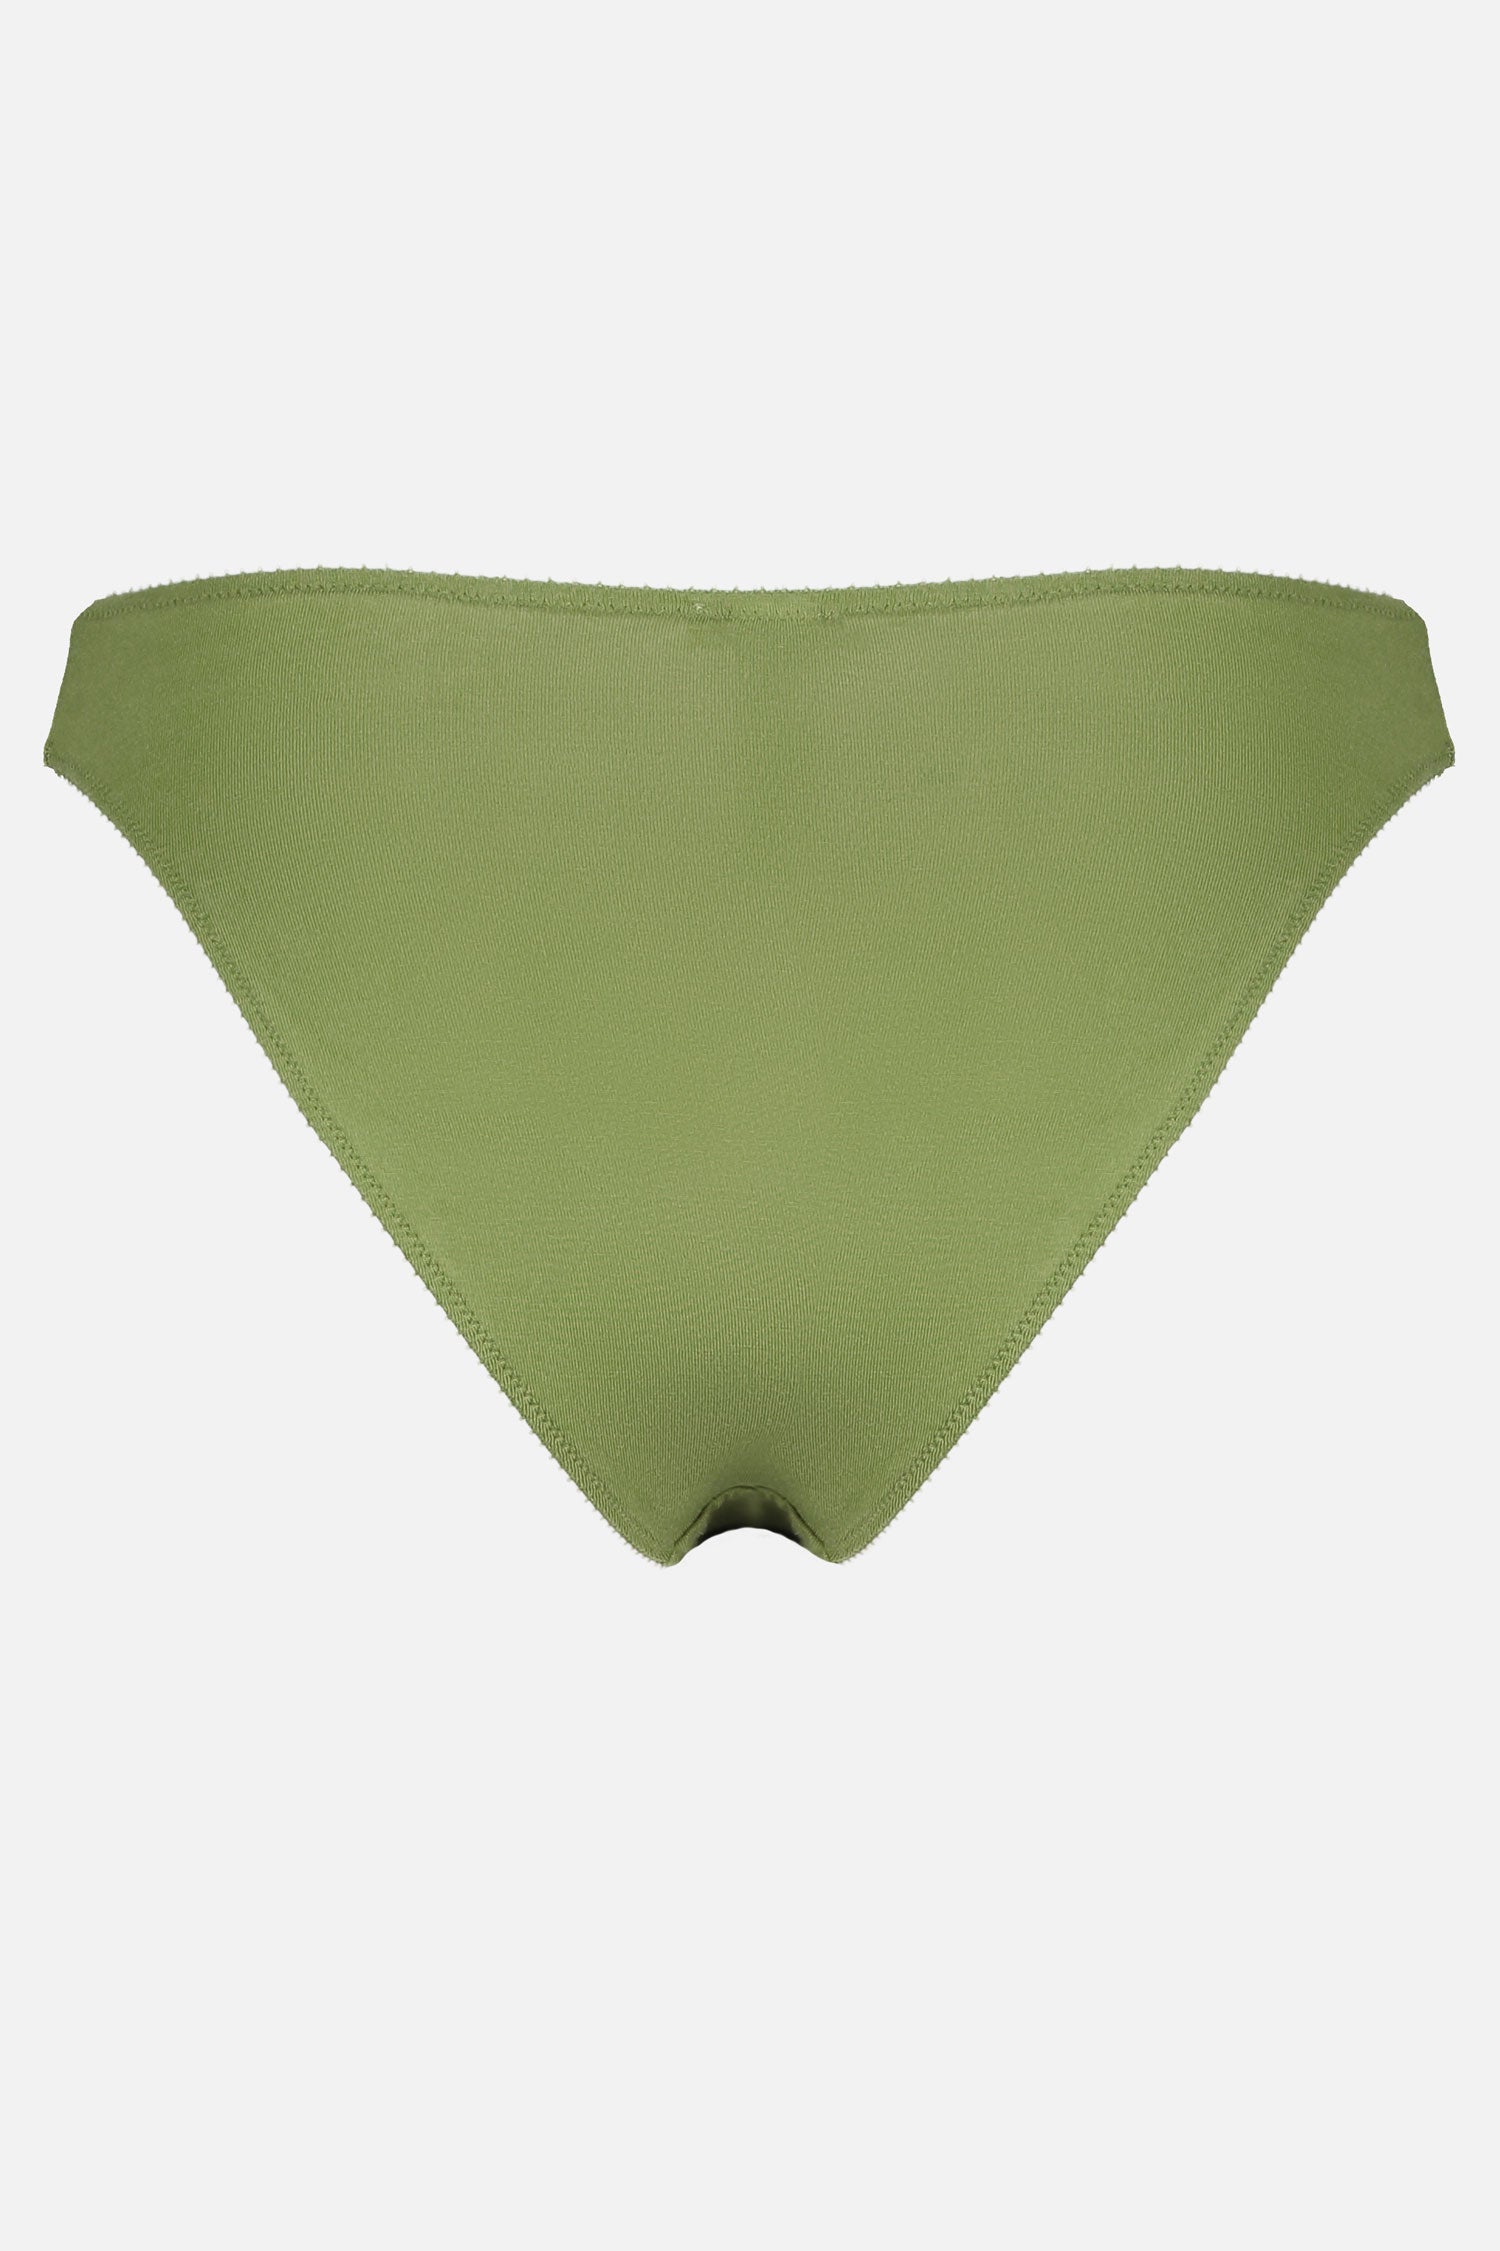 Videris Lingerie bikini knicker in olive TENCEL™  mid-rise style with cheeky bottom coverage and soft elastics